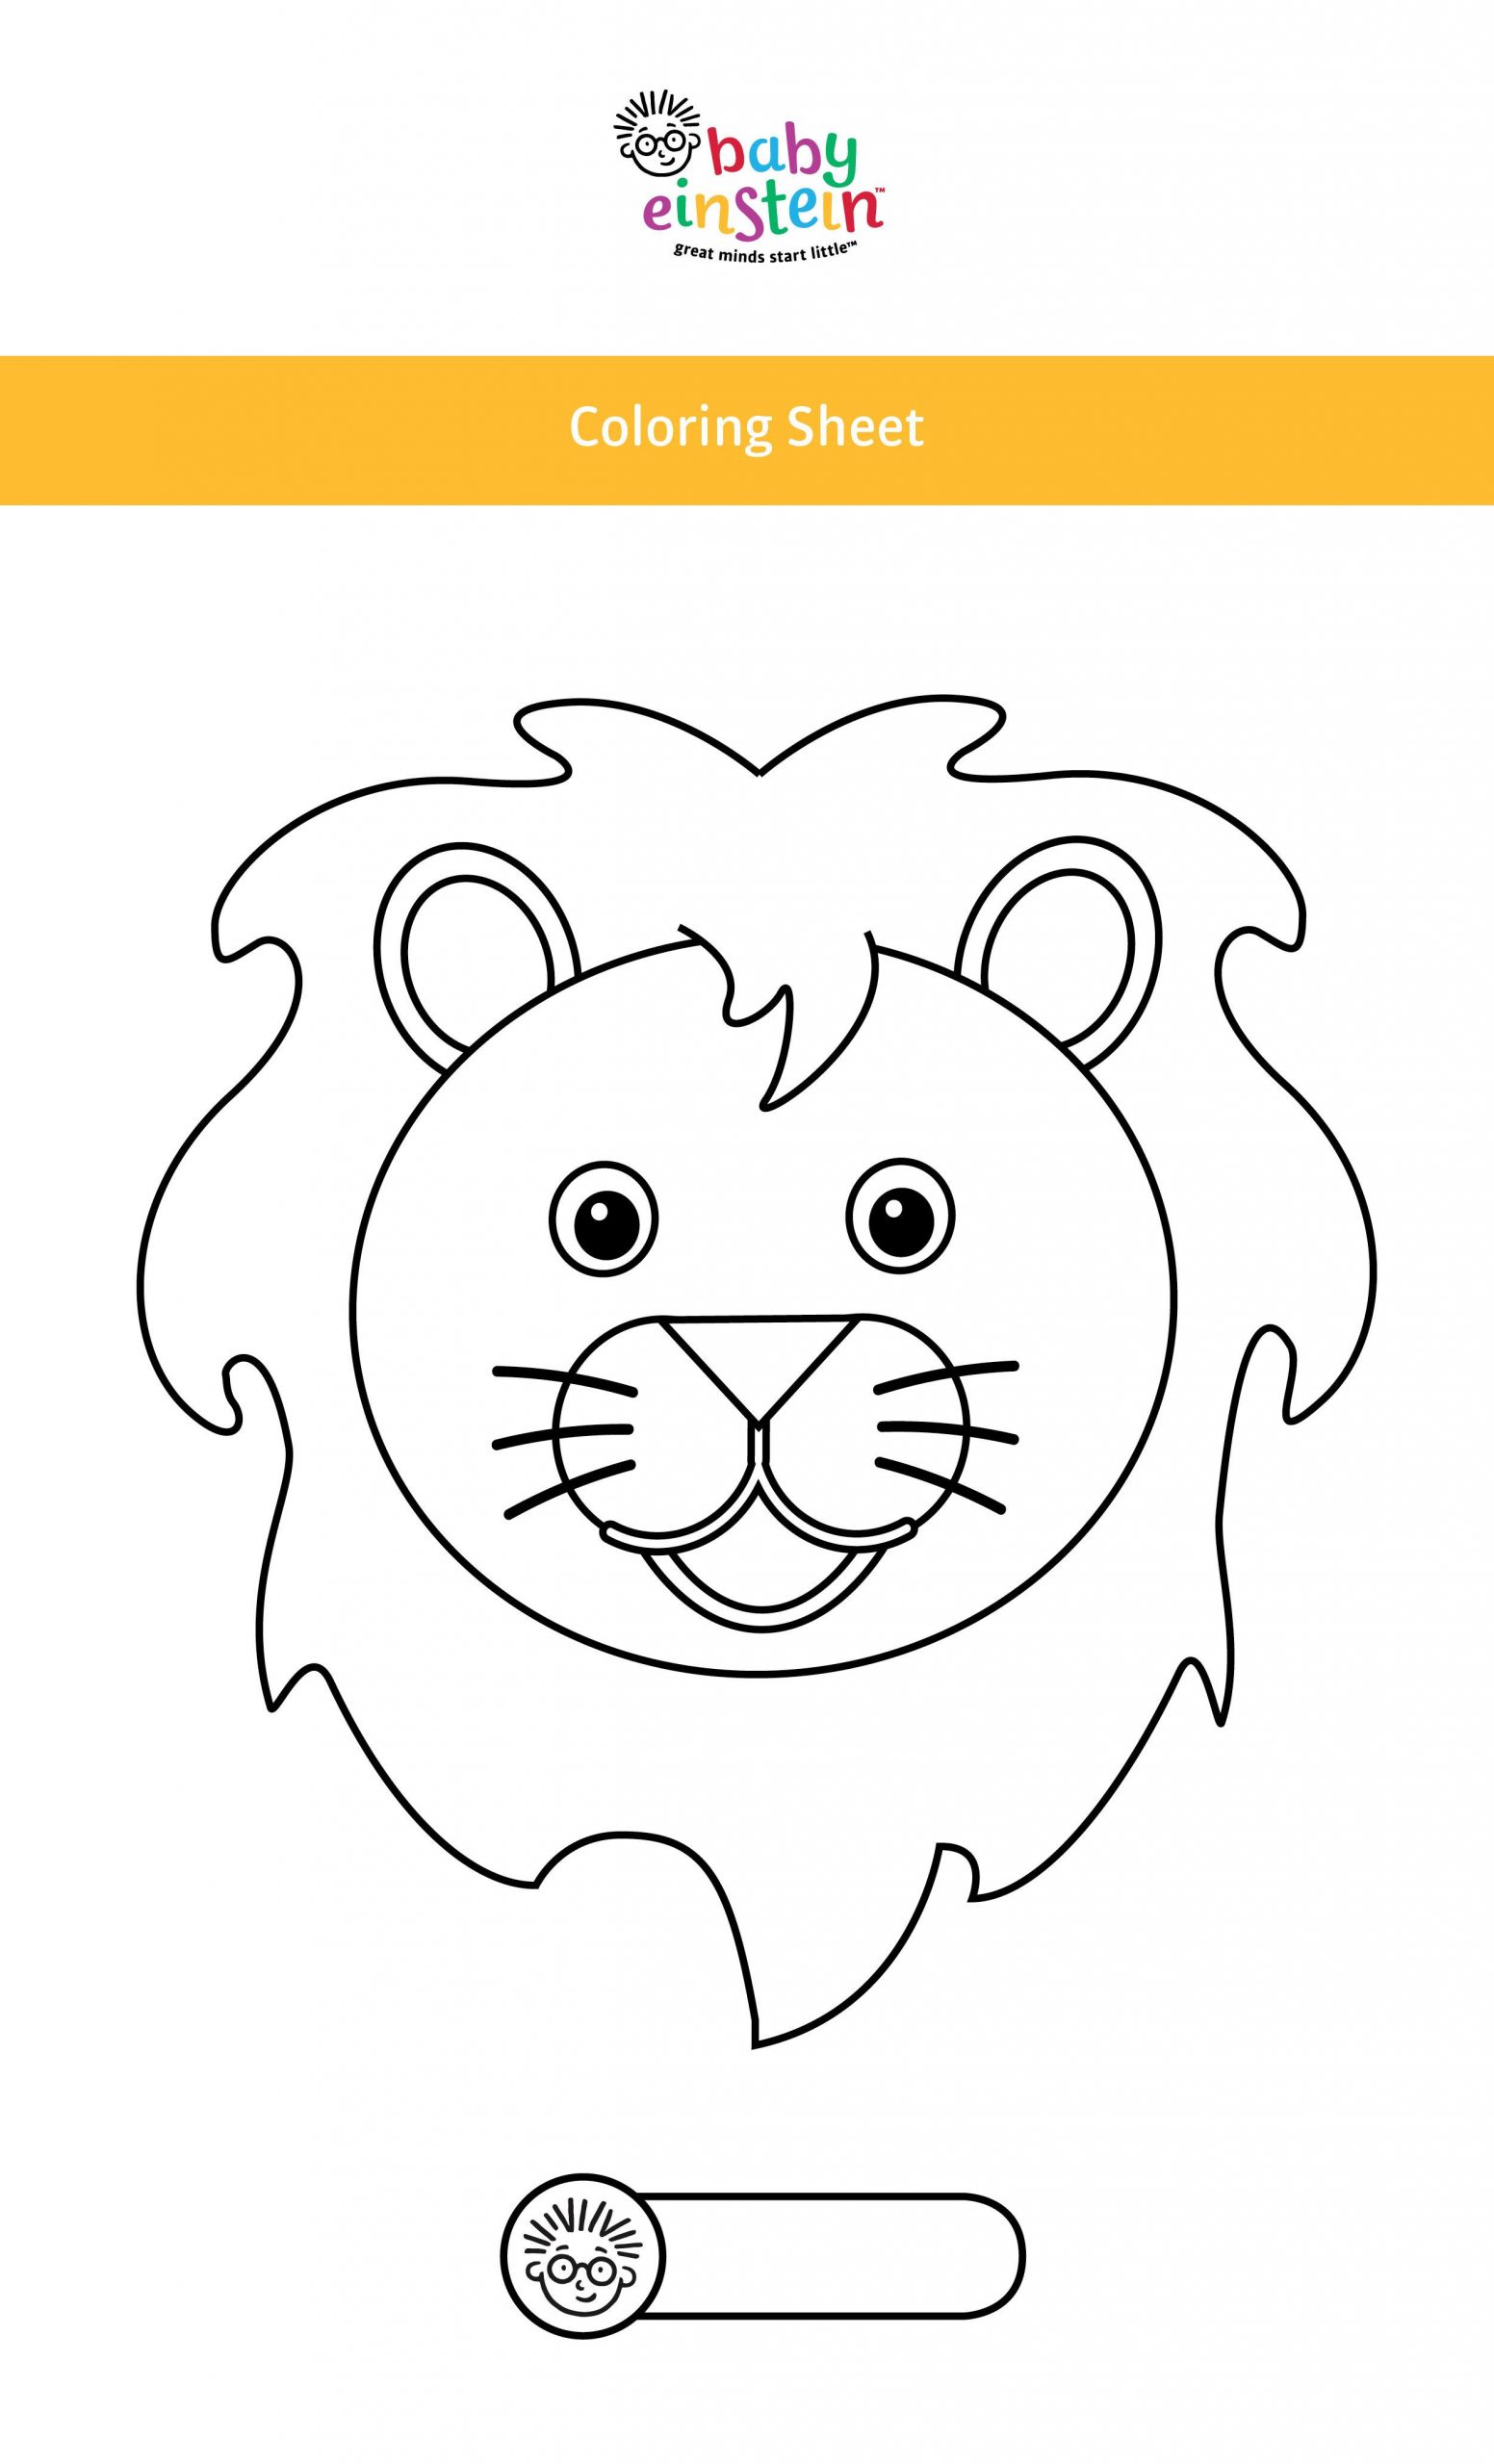 Baby Einstein Coloring Pages
 Adorable Baby Einstein coloring pages for your little one